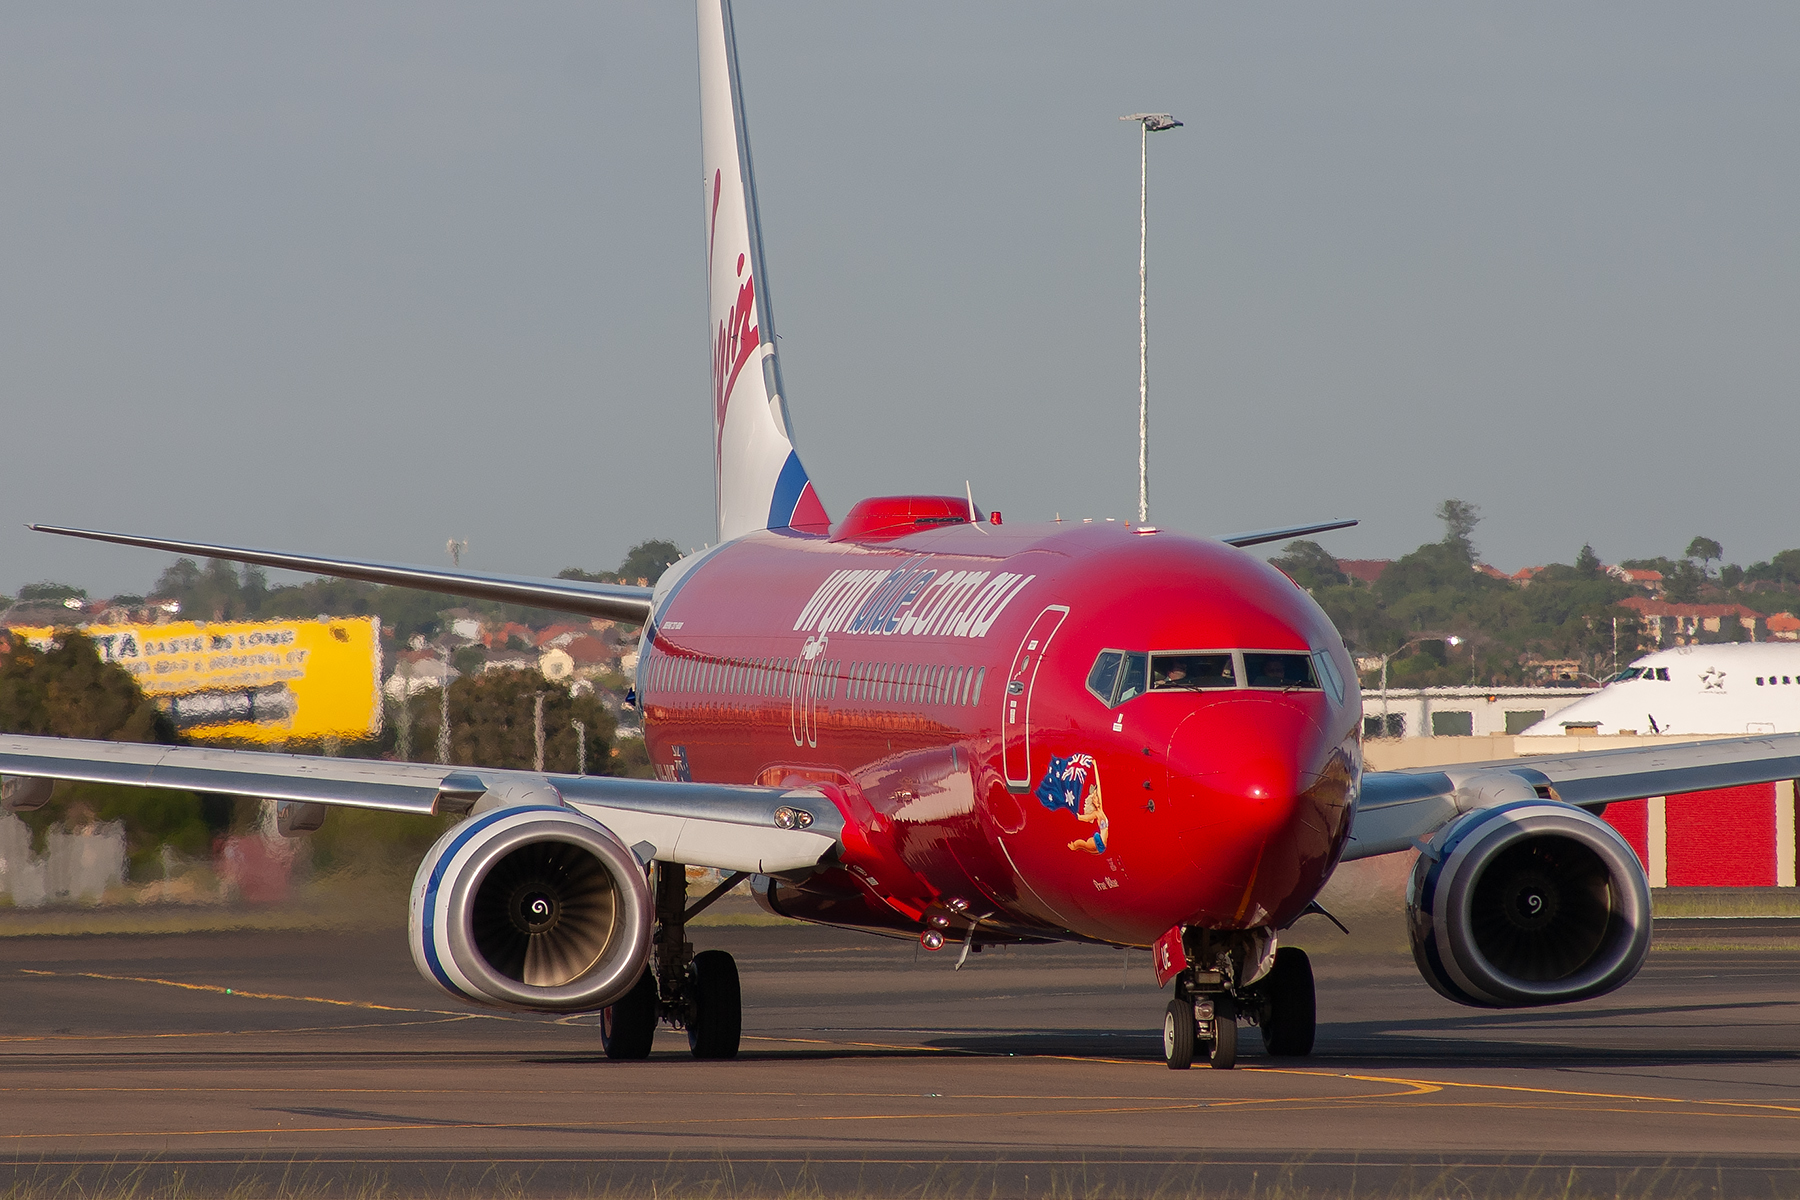 Virgin Blue Airlines Boeing 737-800 VH-VUE at Kingsford Smith